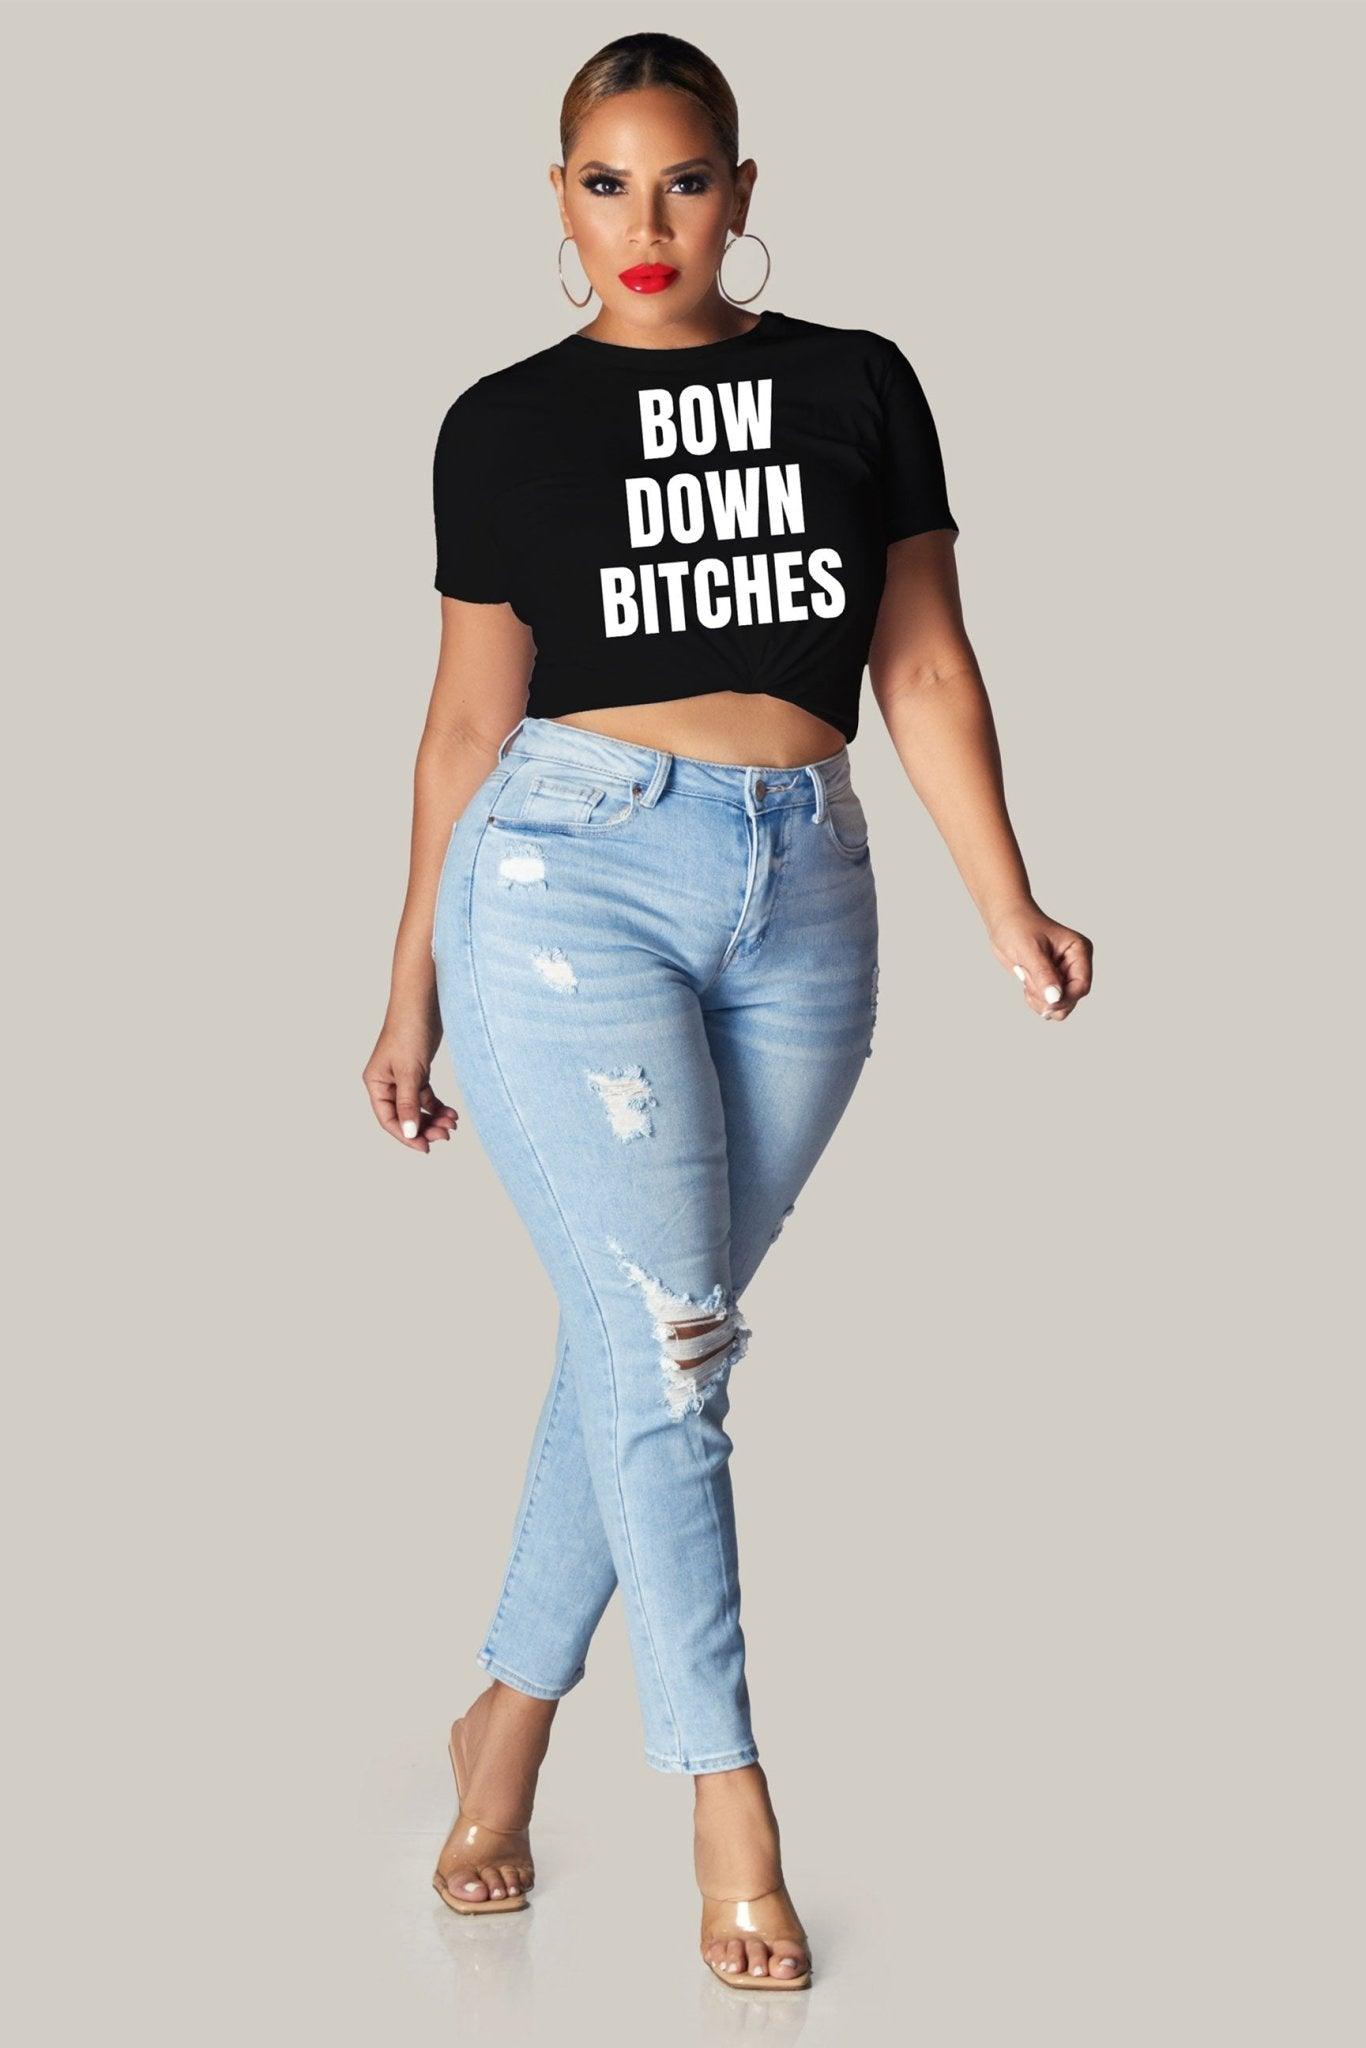 Bow Down Bitches Unisex Jersey Tee - MY SEXY STYLES